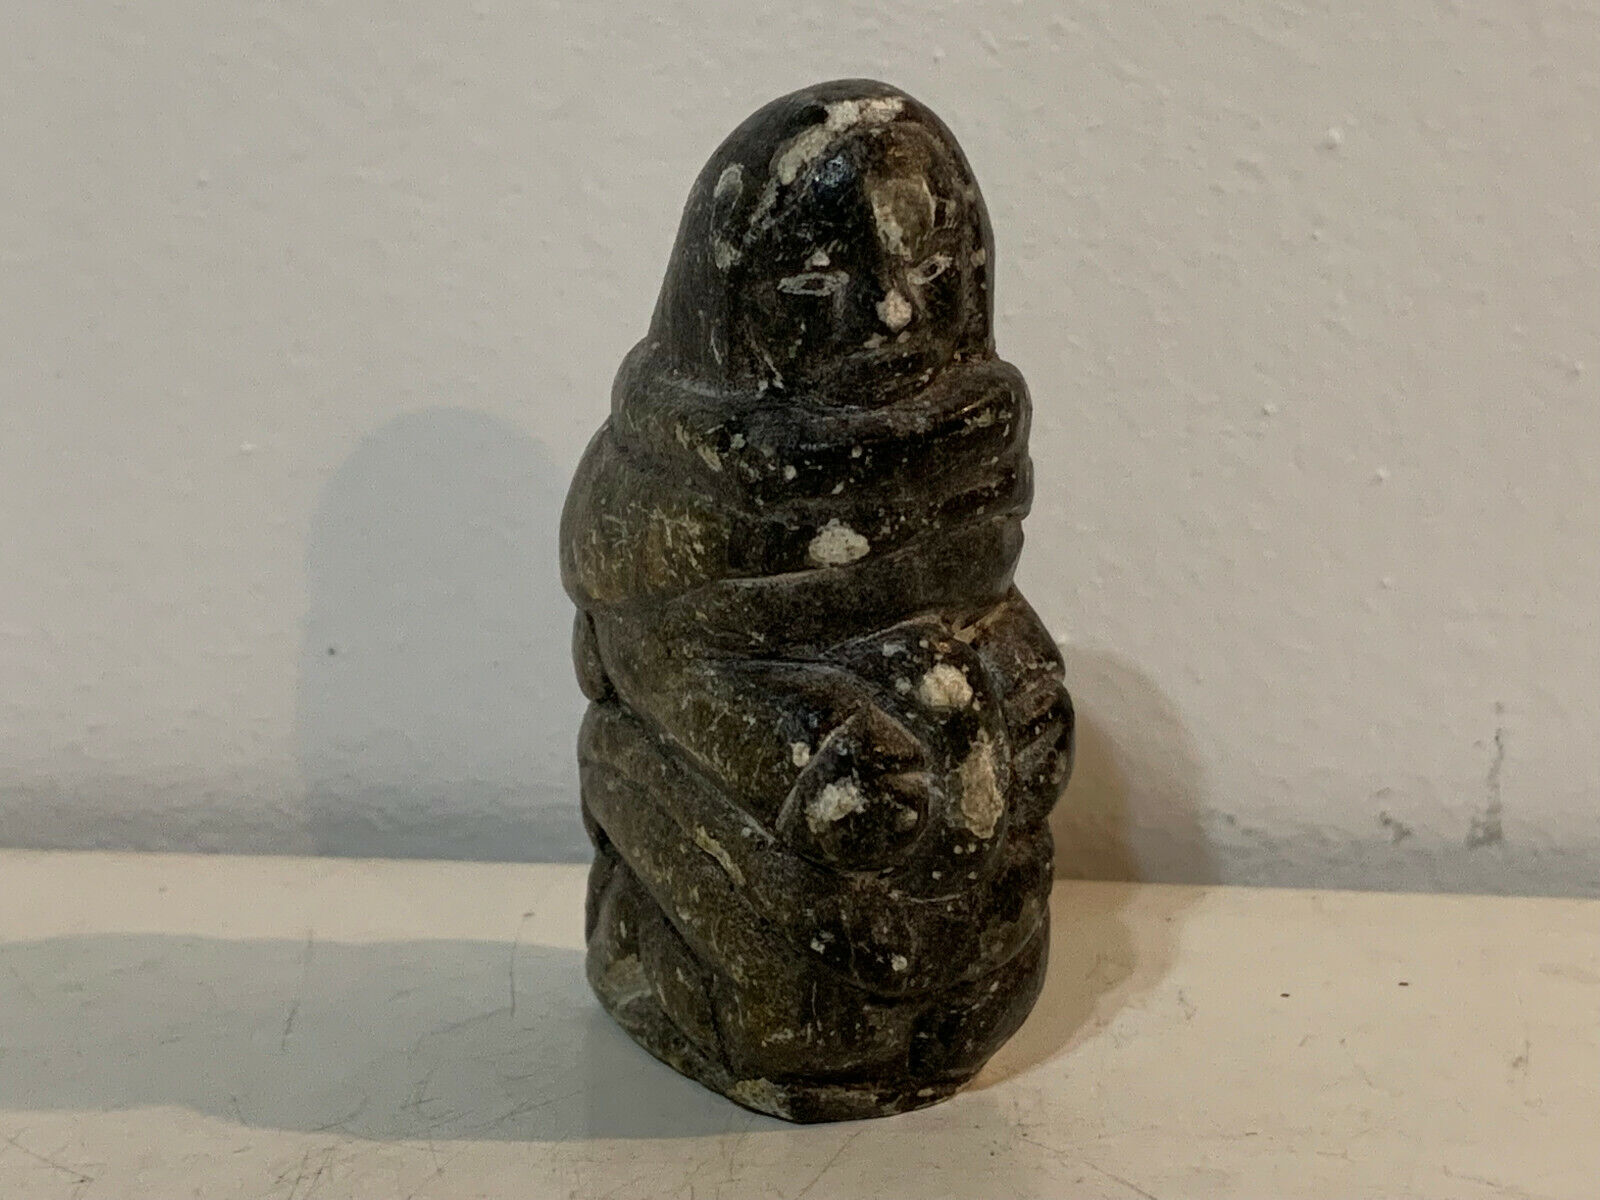 Vintage Possibly Antique Inuit Signed Stone Carving of Man or Woman